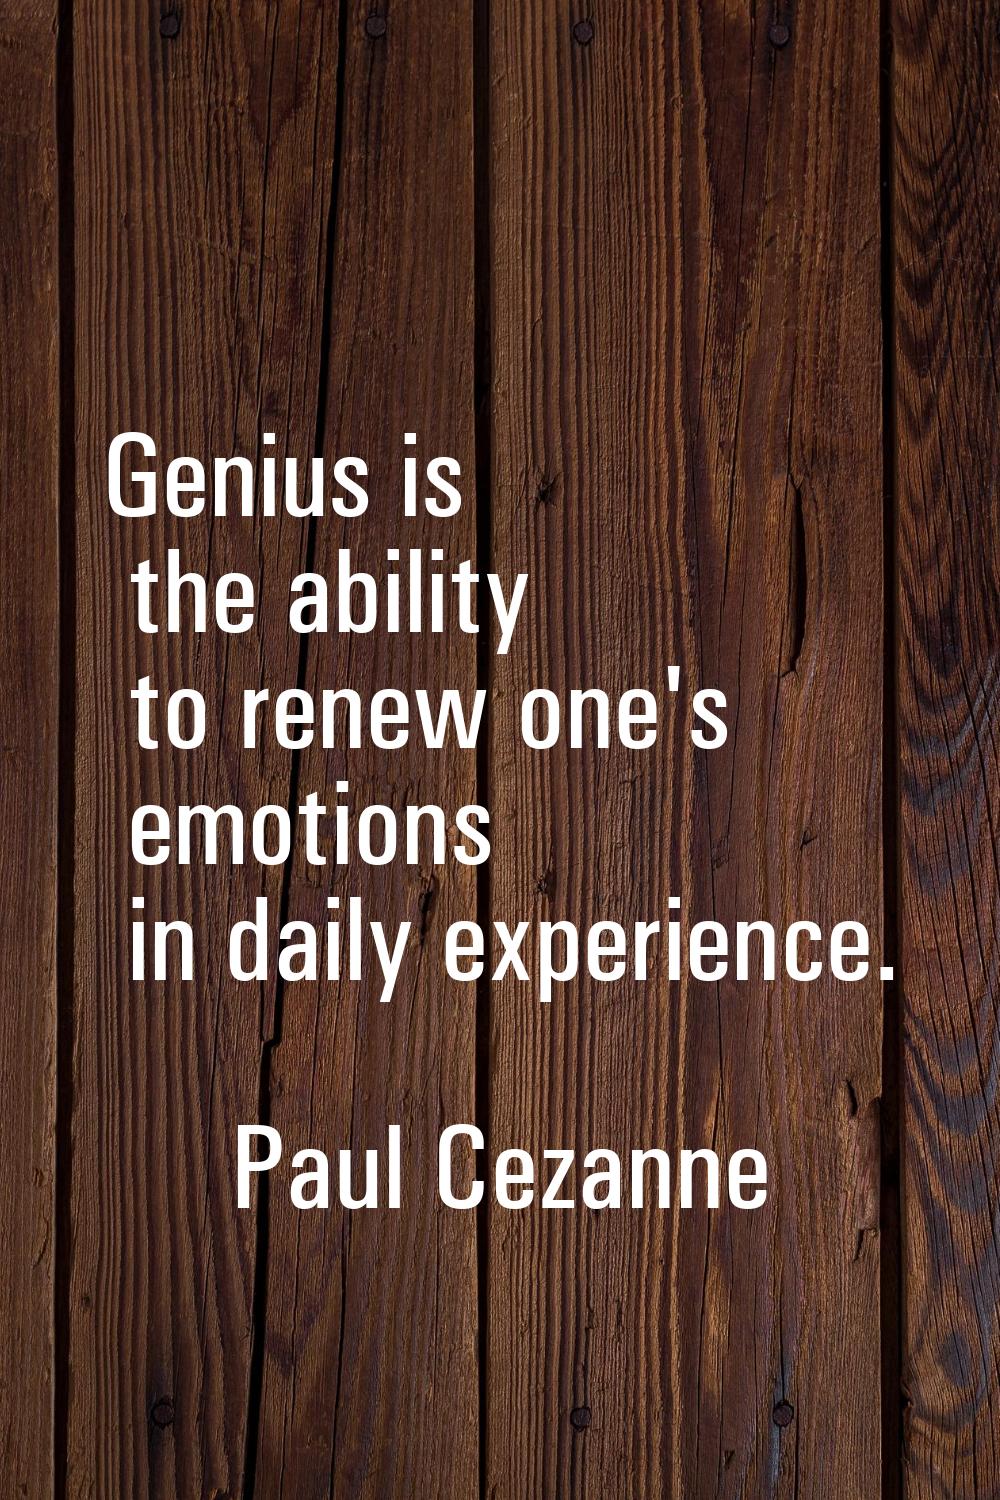 Genius is the ability to renew one's emotions in daily experience.